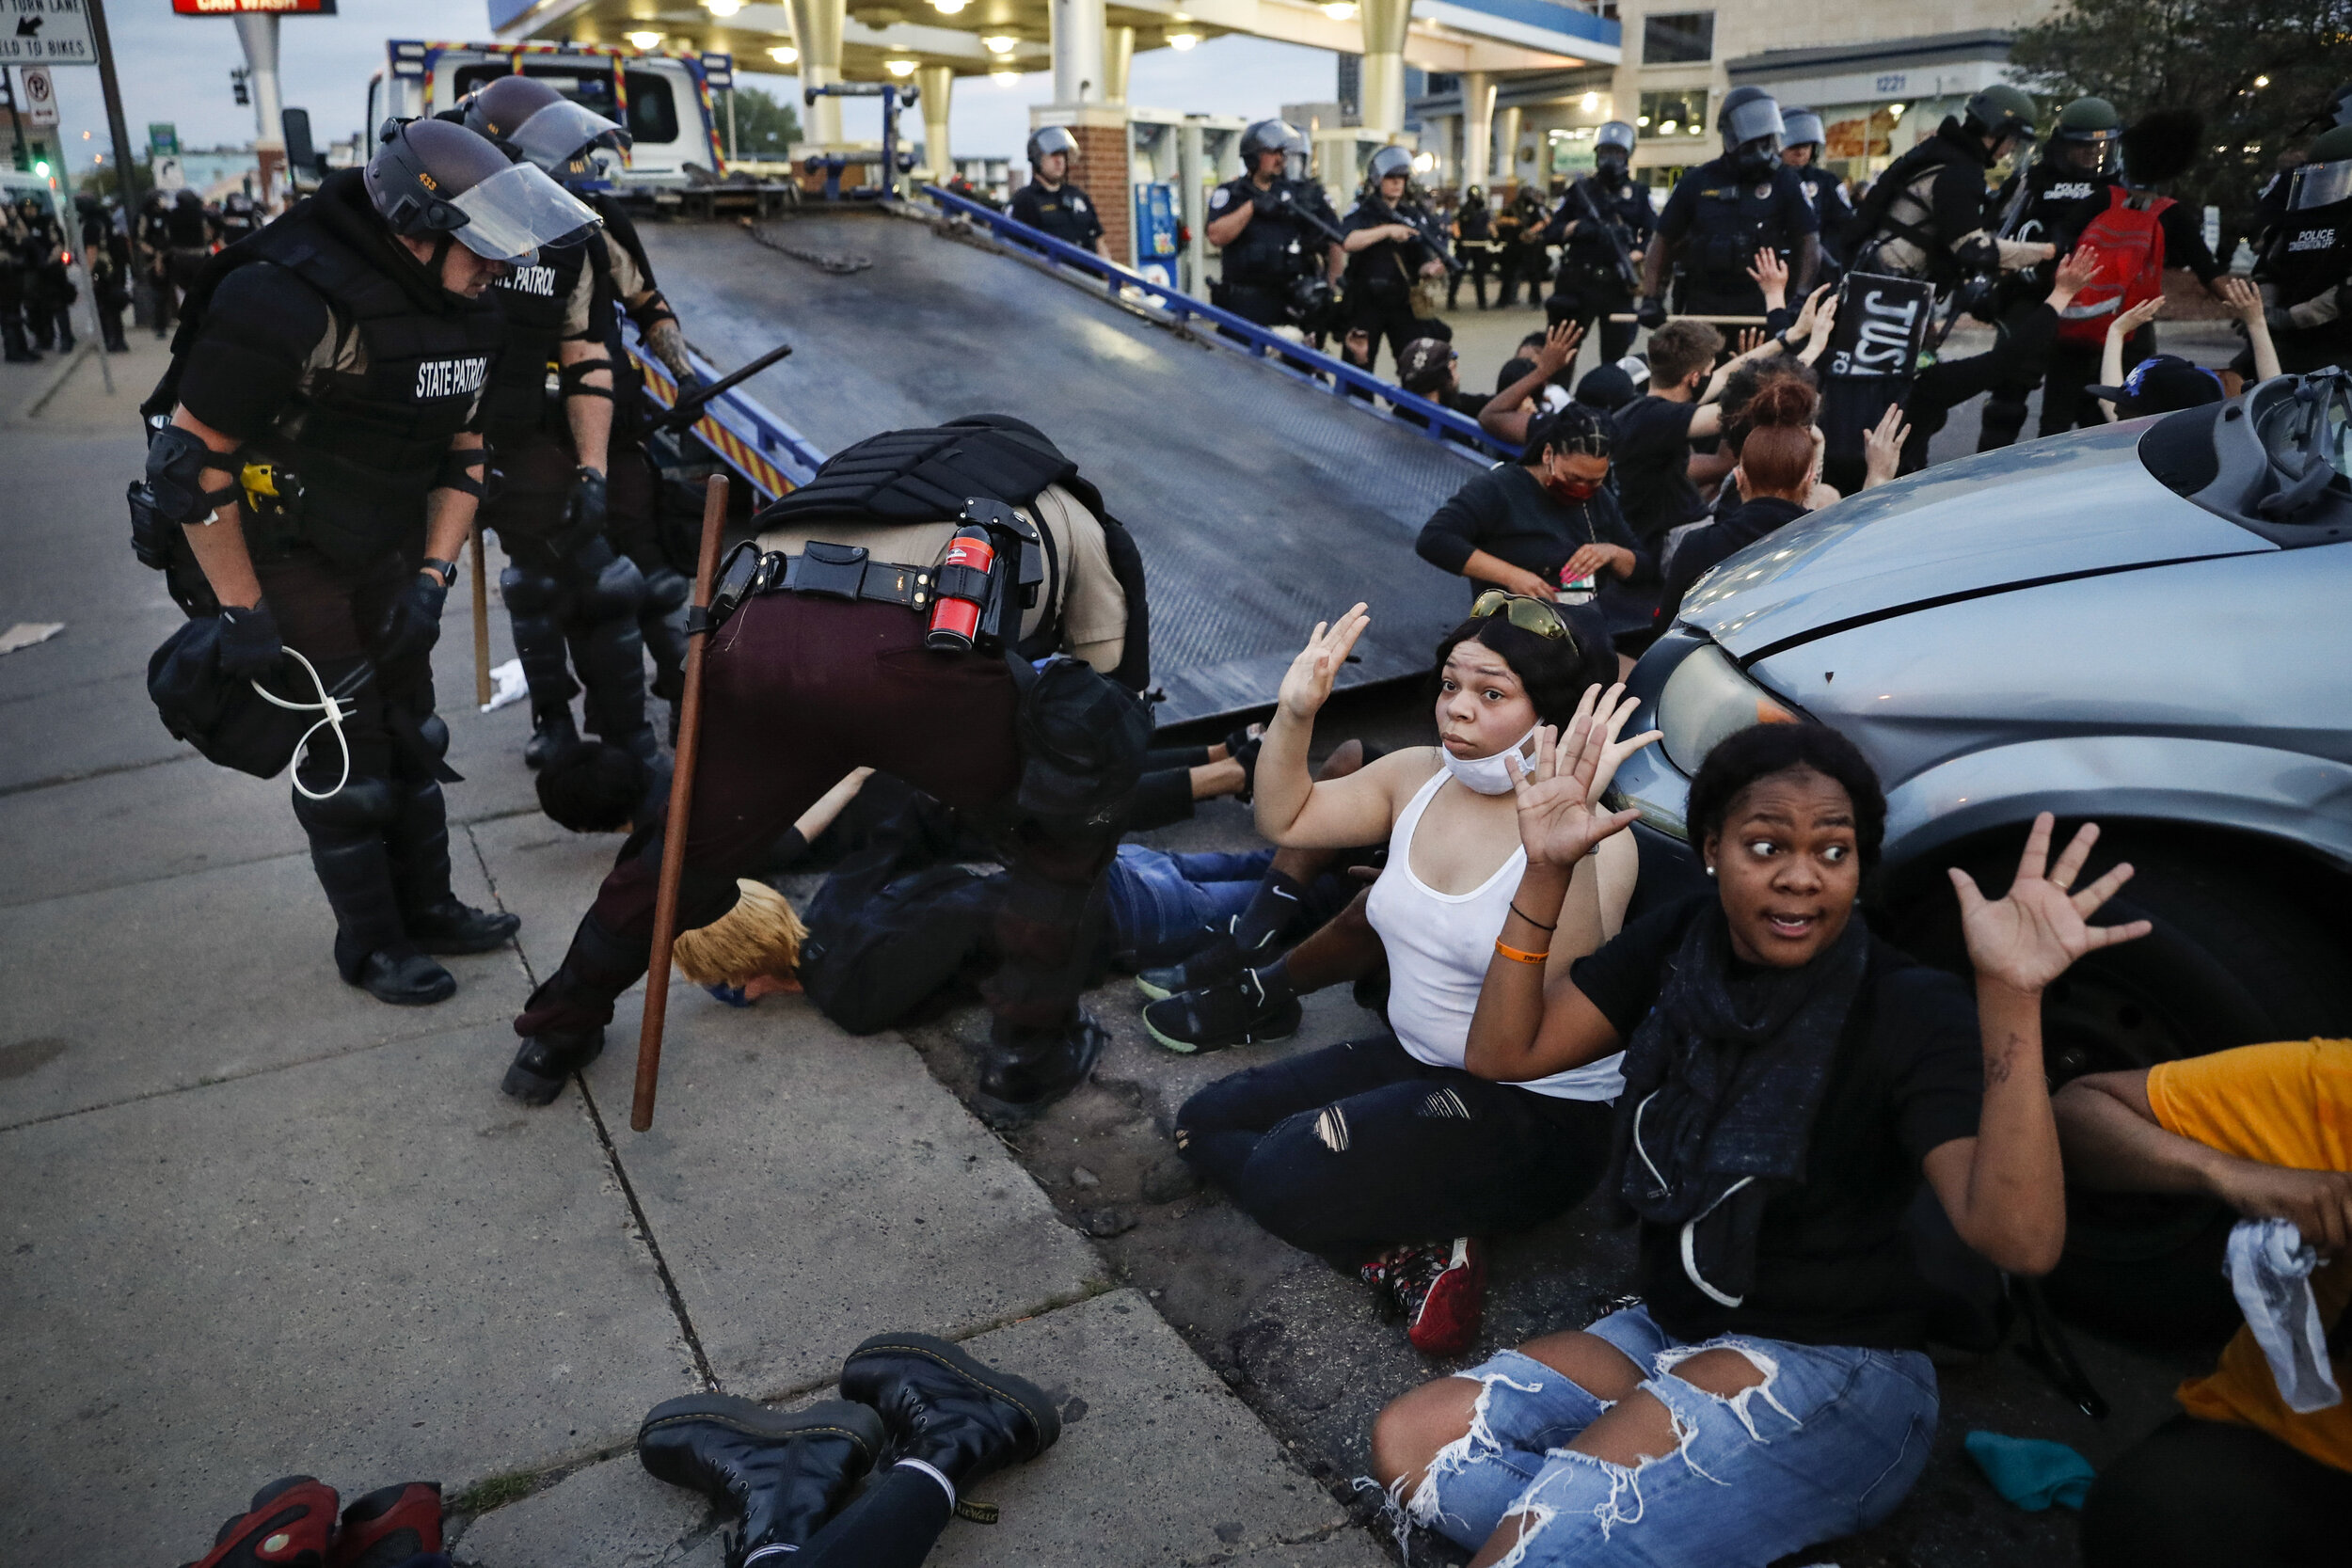  Protesters raise their hands on command from police as they are detained prior to arrest and processing at a gas station on South Washington Street, May 31, 2020, in Minneapolis. (AP Photo/John Minchillo) 